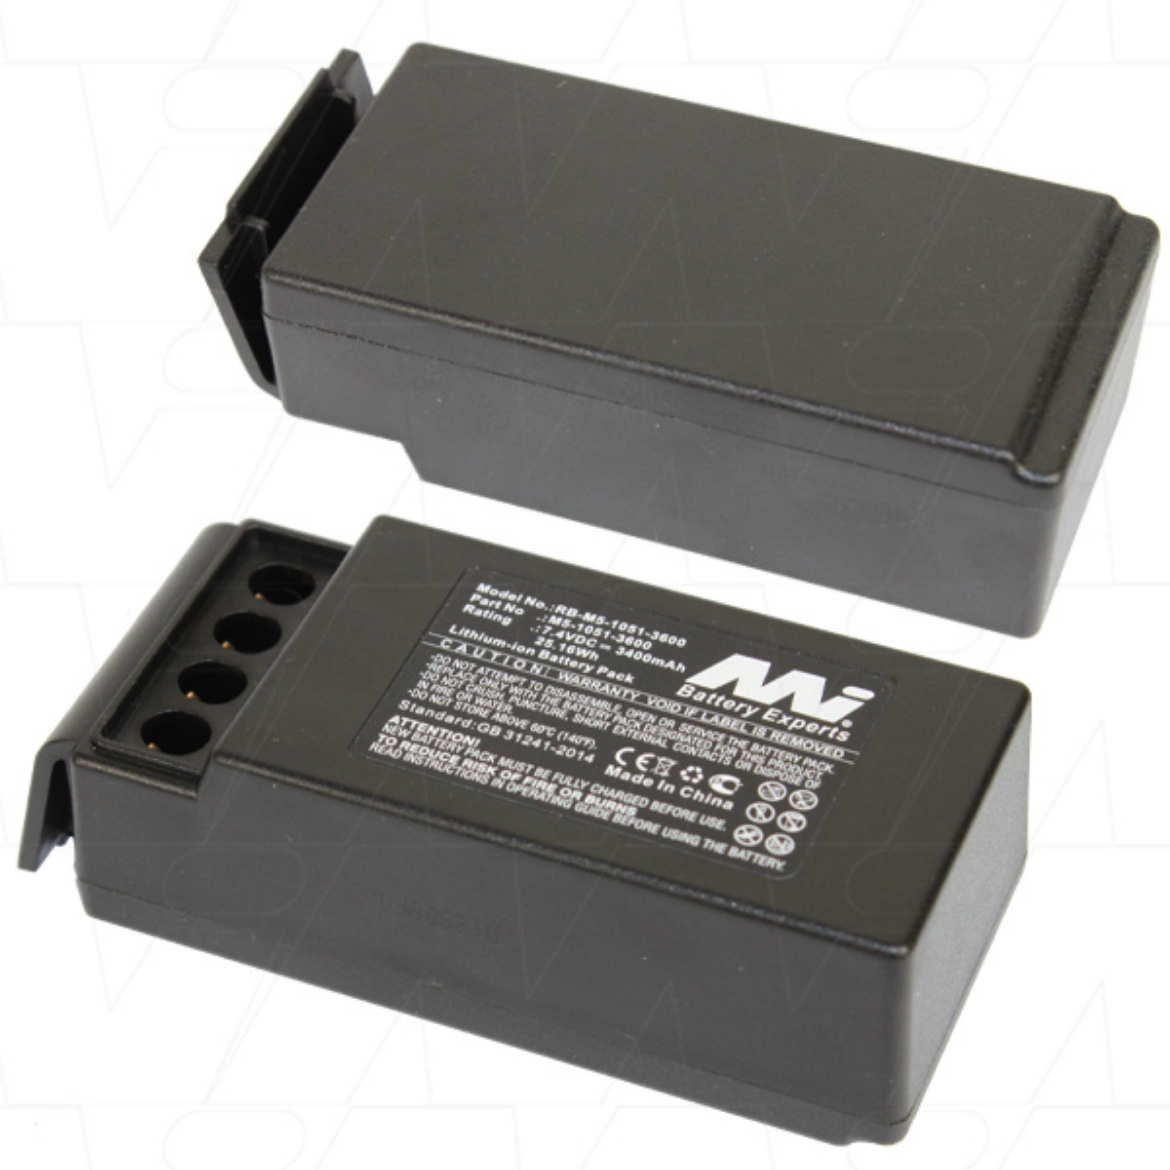 Picture of ARB-M5-1051-3600 CRANE REMOTE BATTERY 7.4V 3.4AH 25.2Wh LITHIUM ION